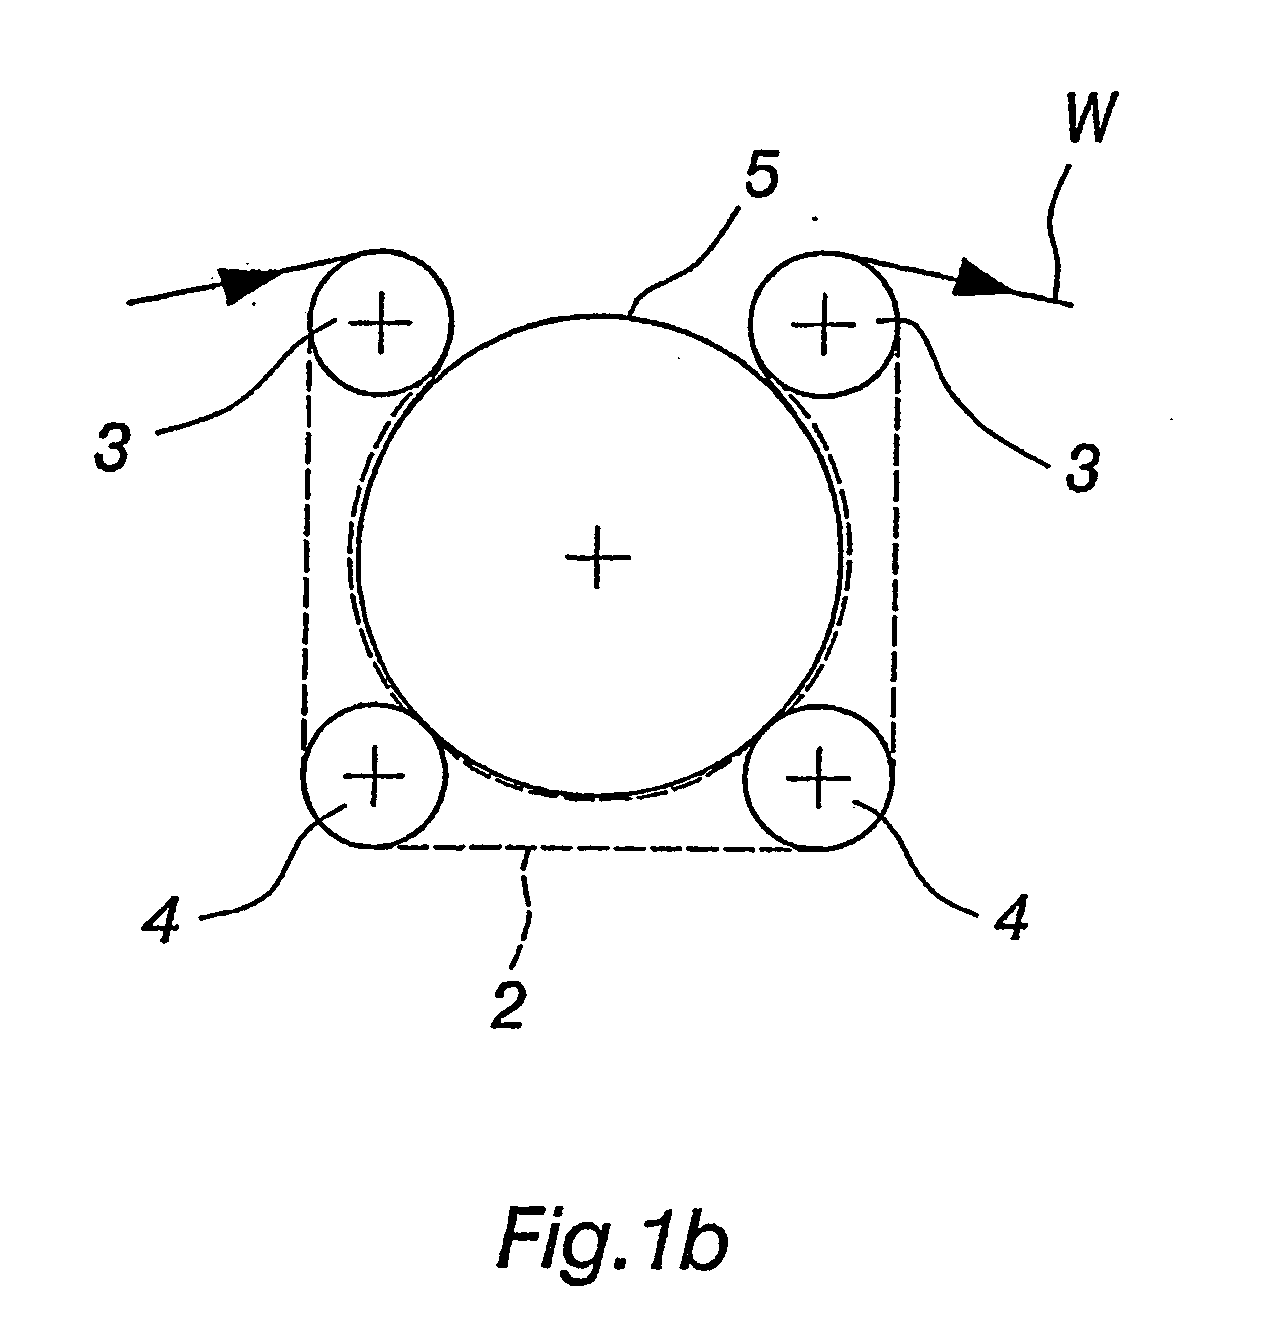 Processing device and method of operating the device for processing a coated or uncoated fibrous web